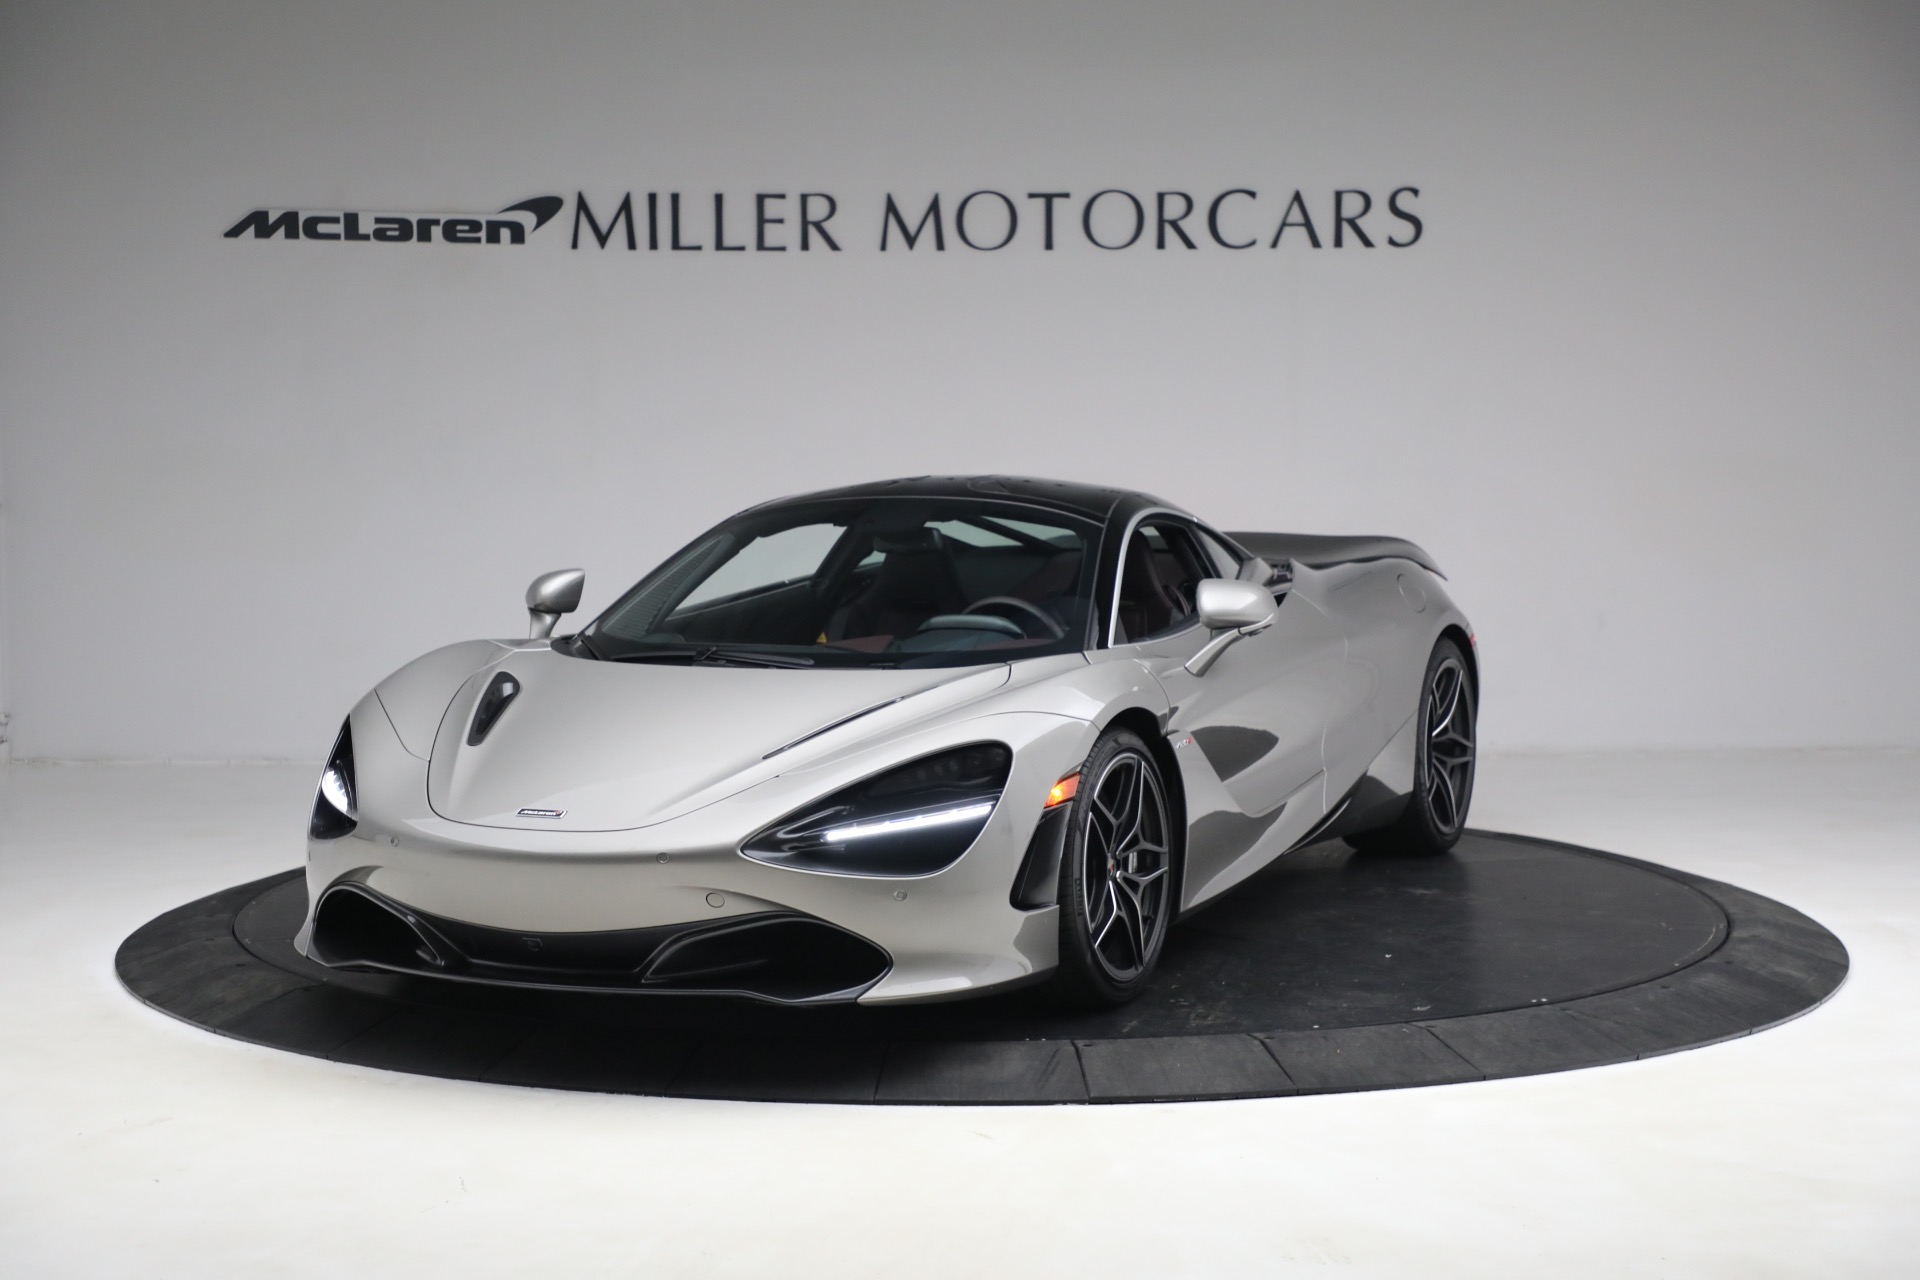 Used 2018 McLaren 720S Luxury for sale $273,900 at Bugatti of Greenwich in Greenwich CT 06830 1